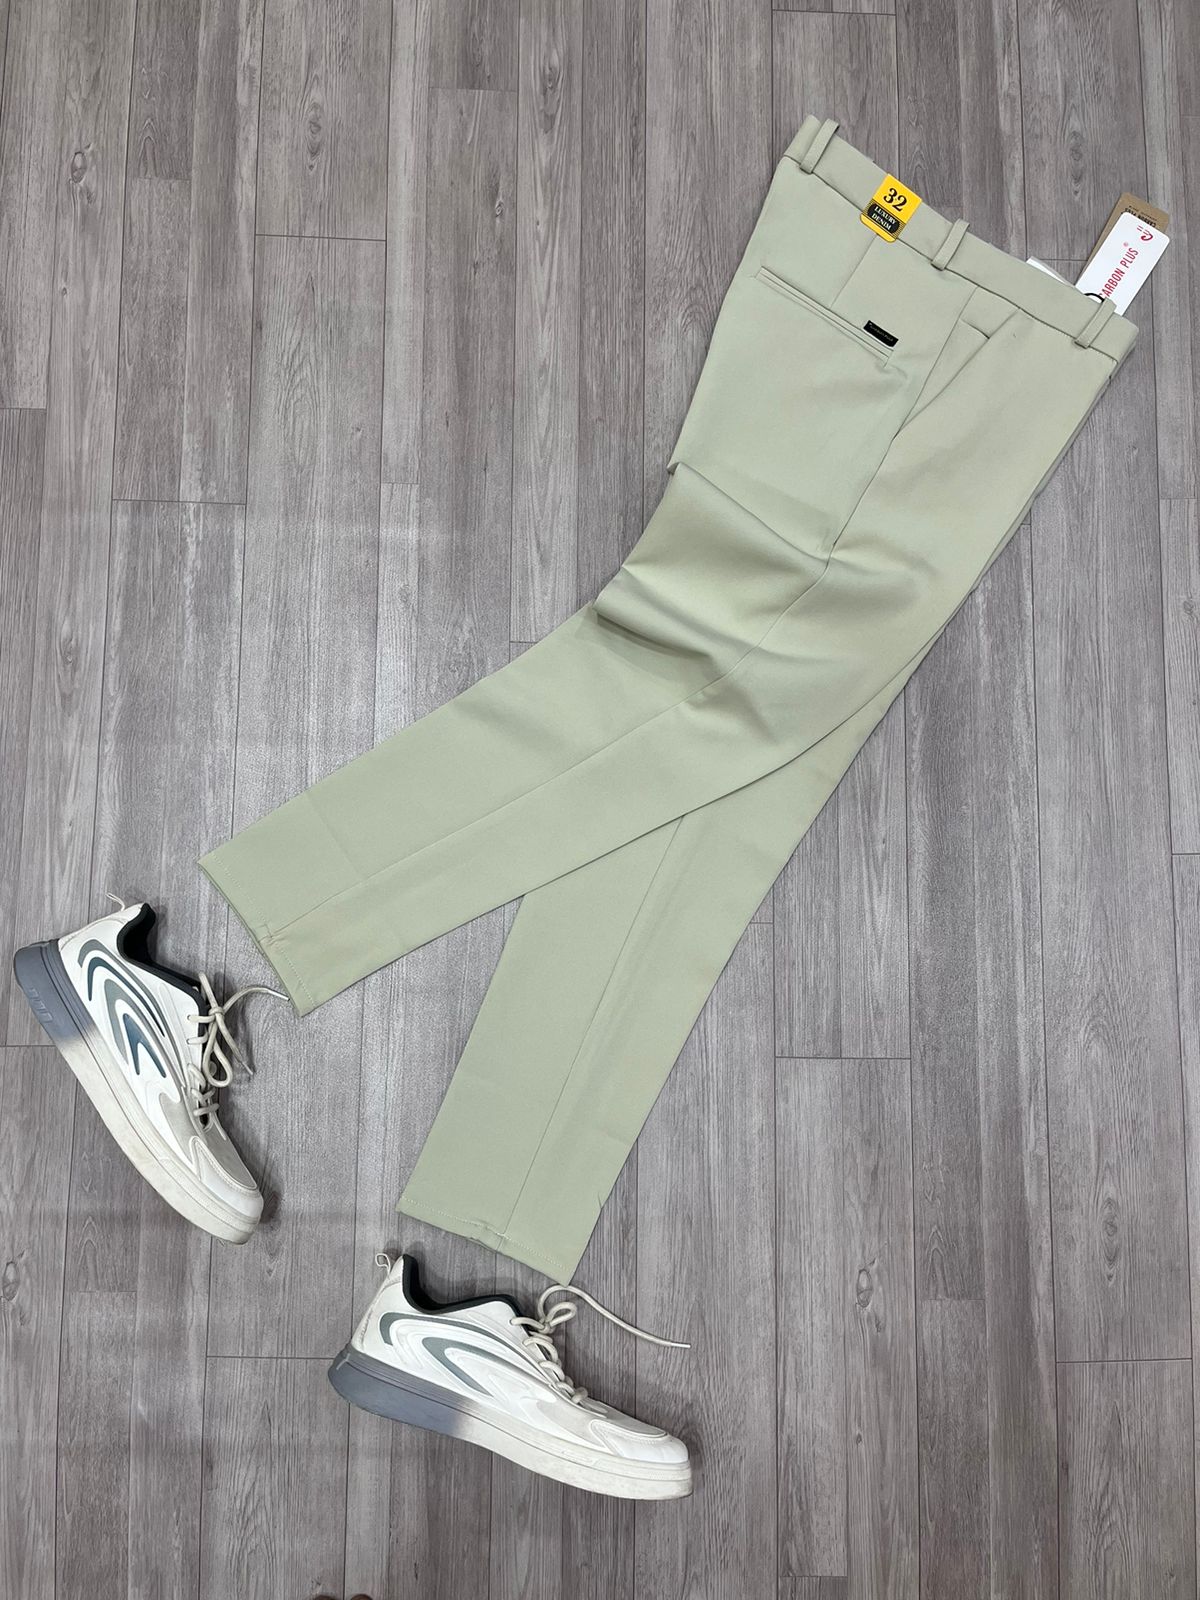 Men's Latest Formal Lycra Pants For Summer.Attractive Pants Designs.Rasgon  #Shorts - YouTube